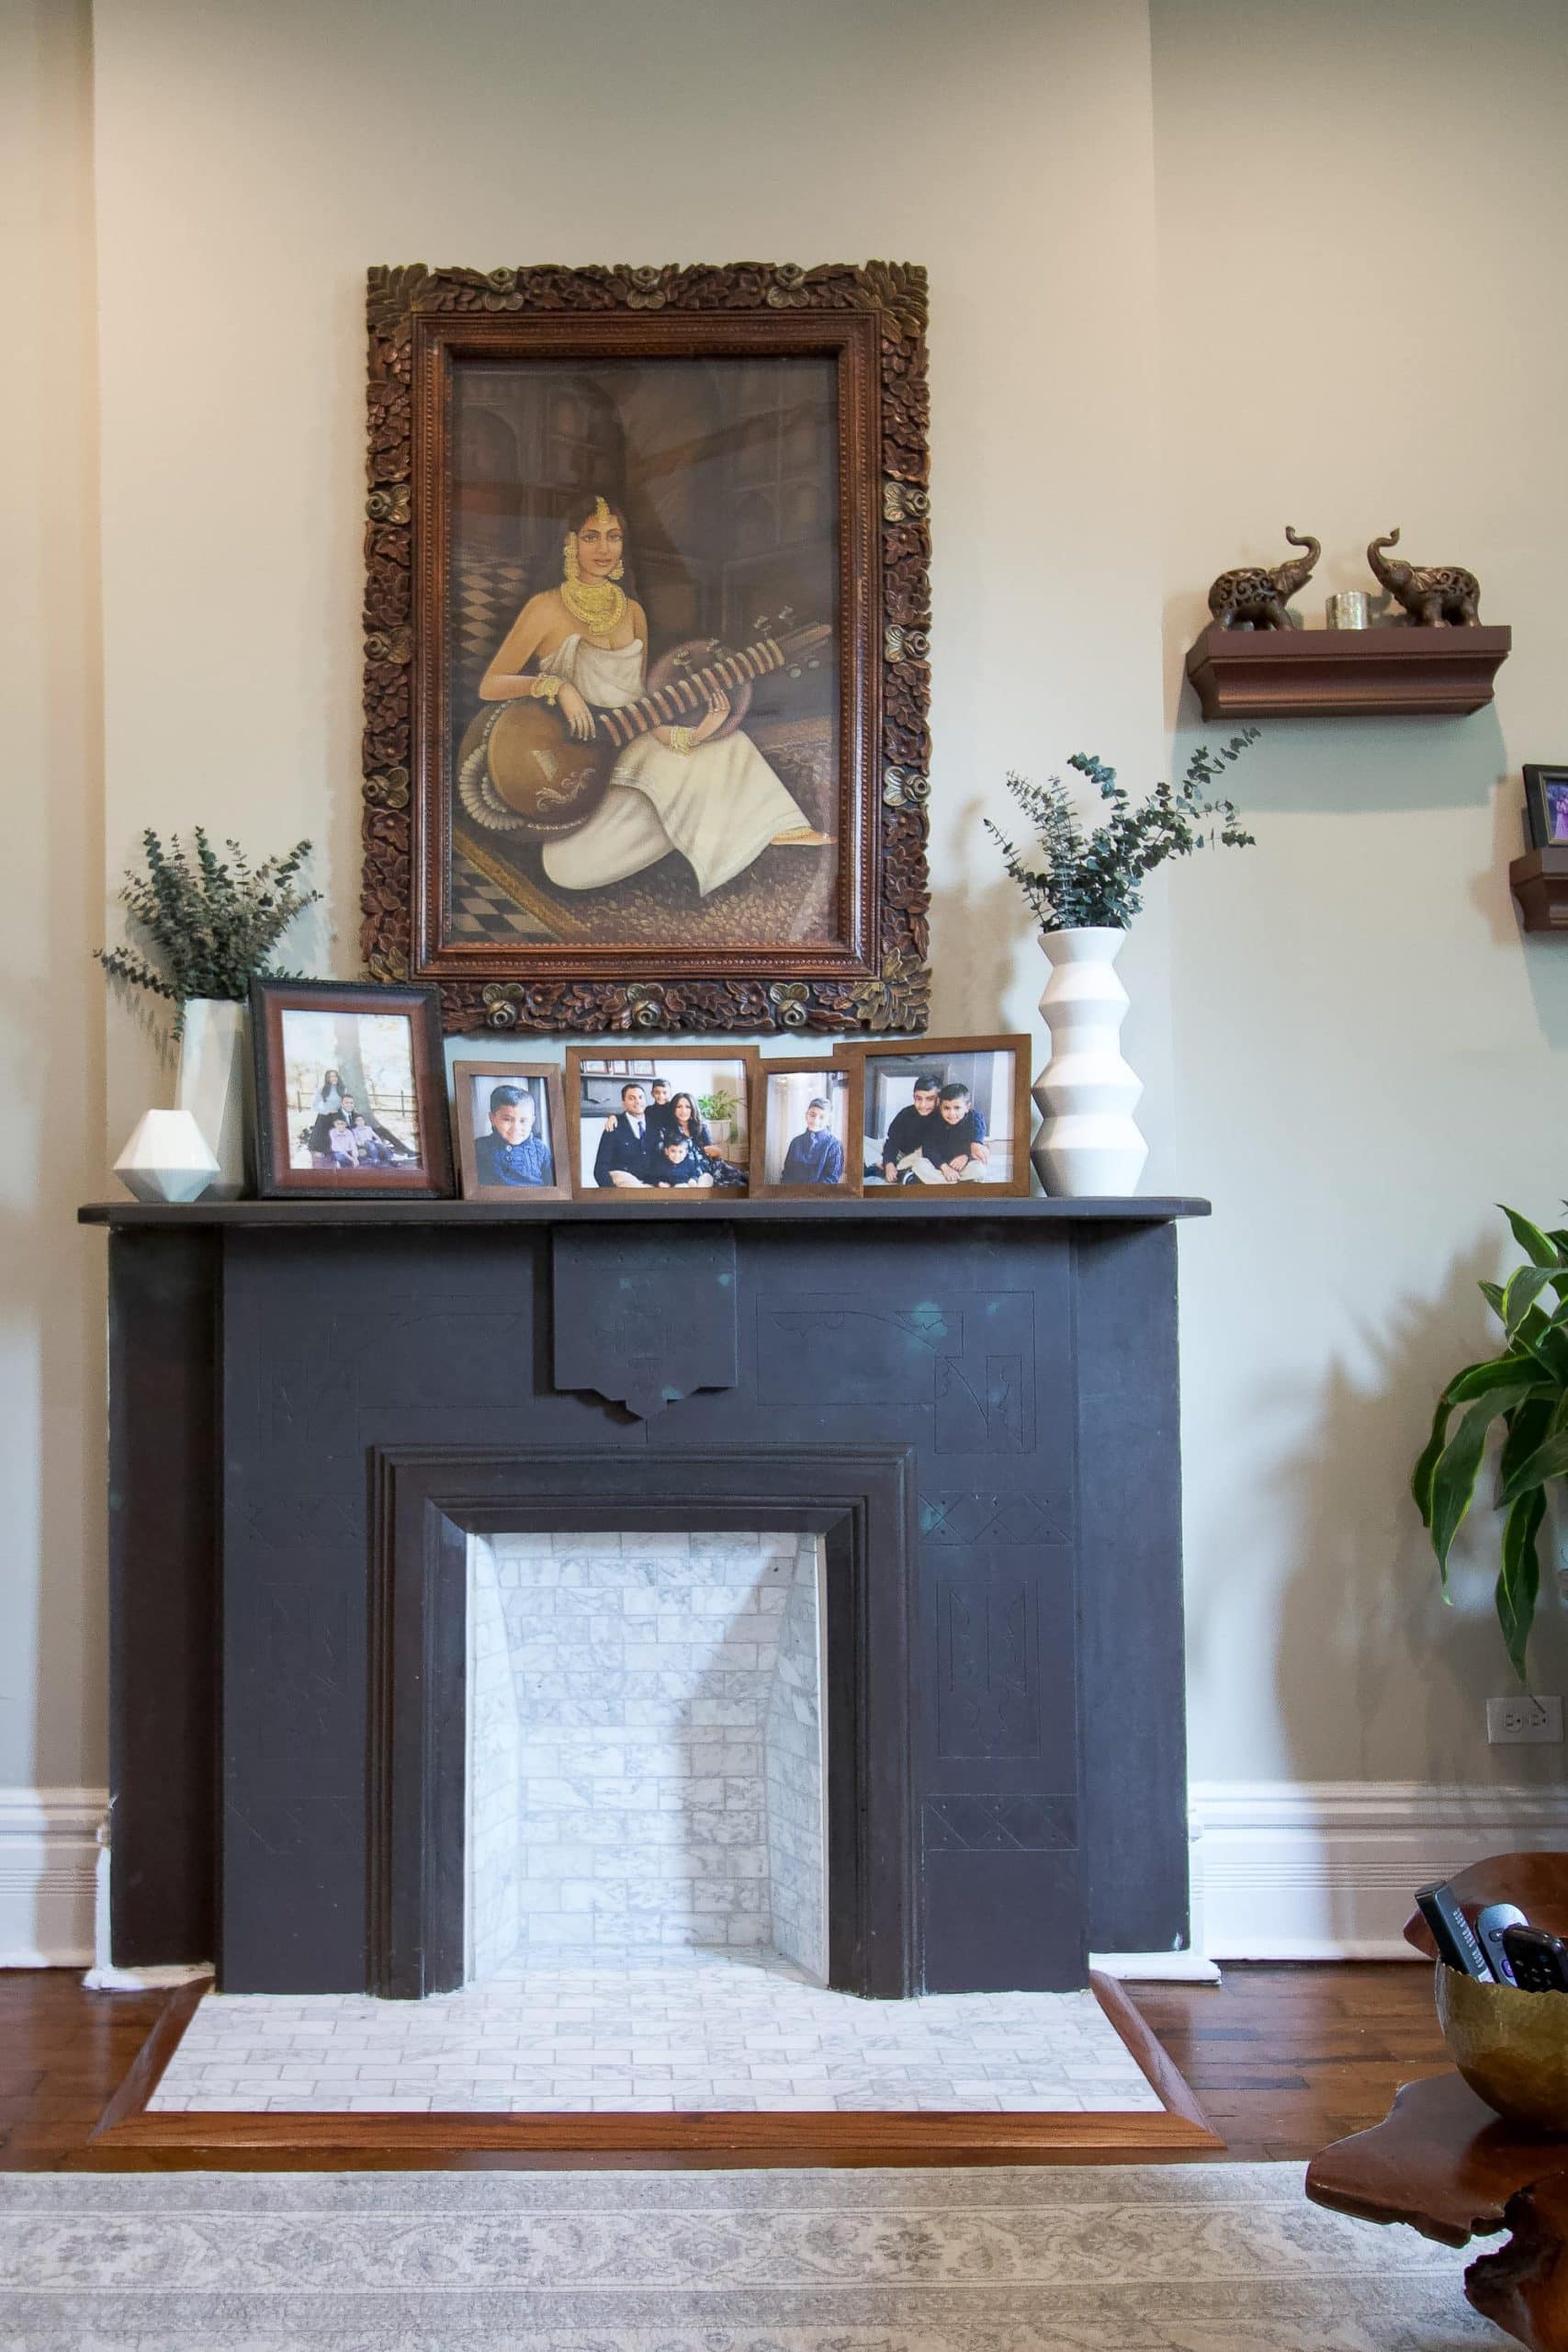 Old fireplace in a historic home